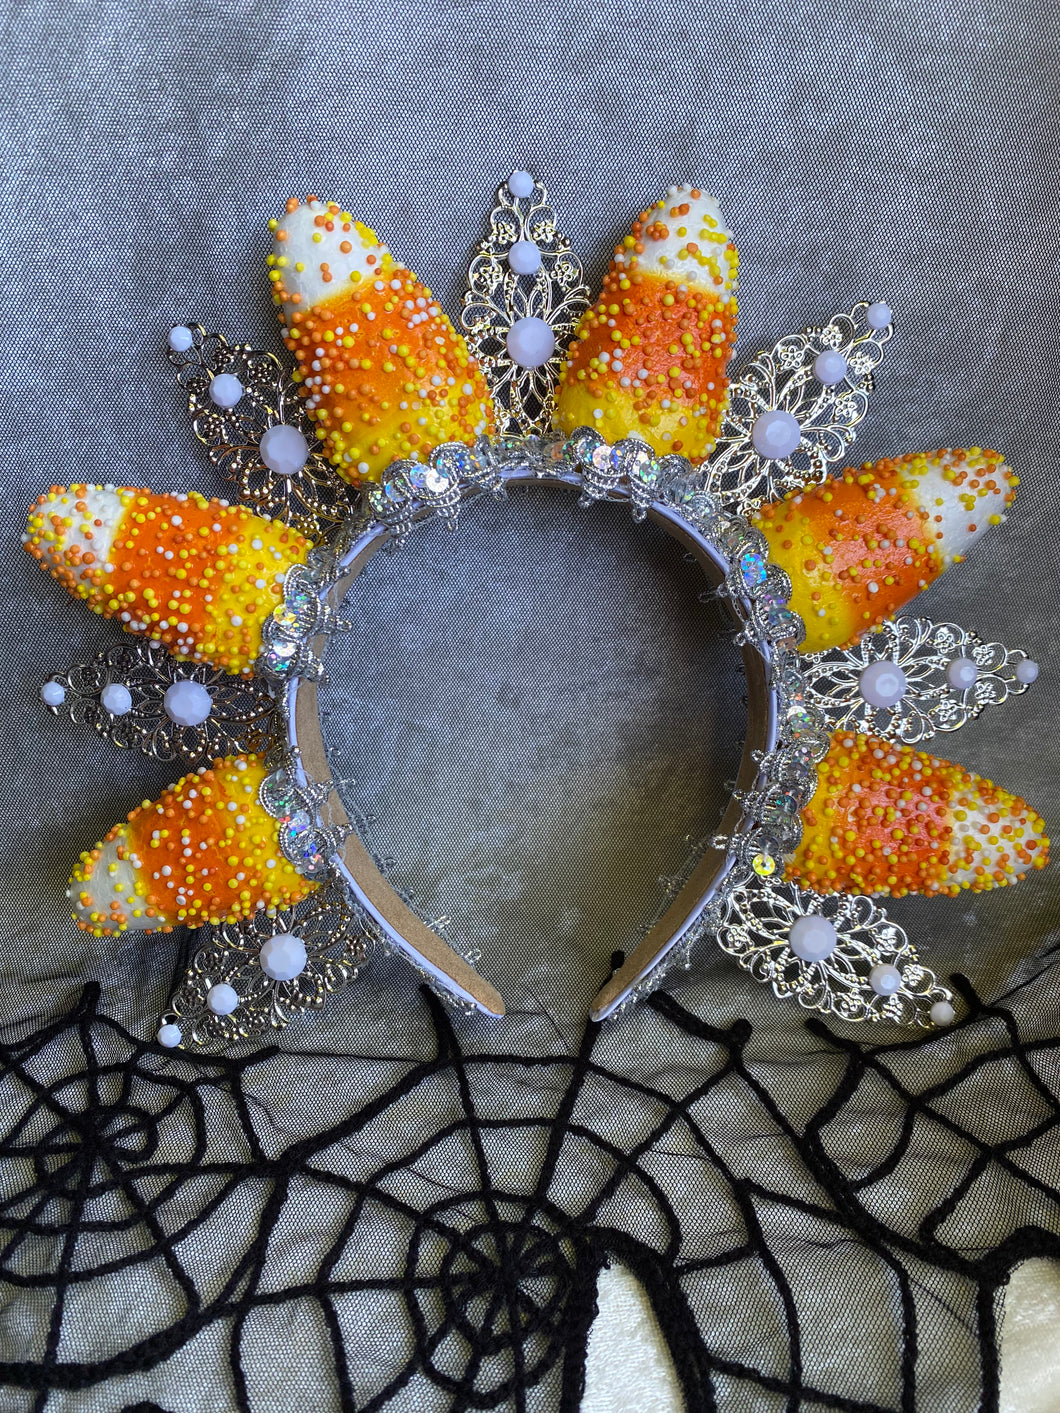 The Candy Corn Crown